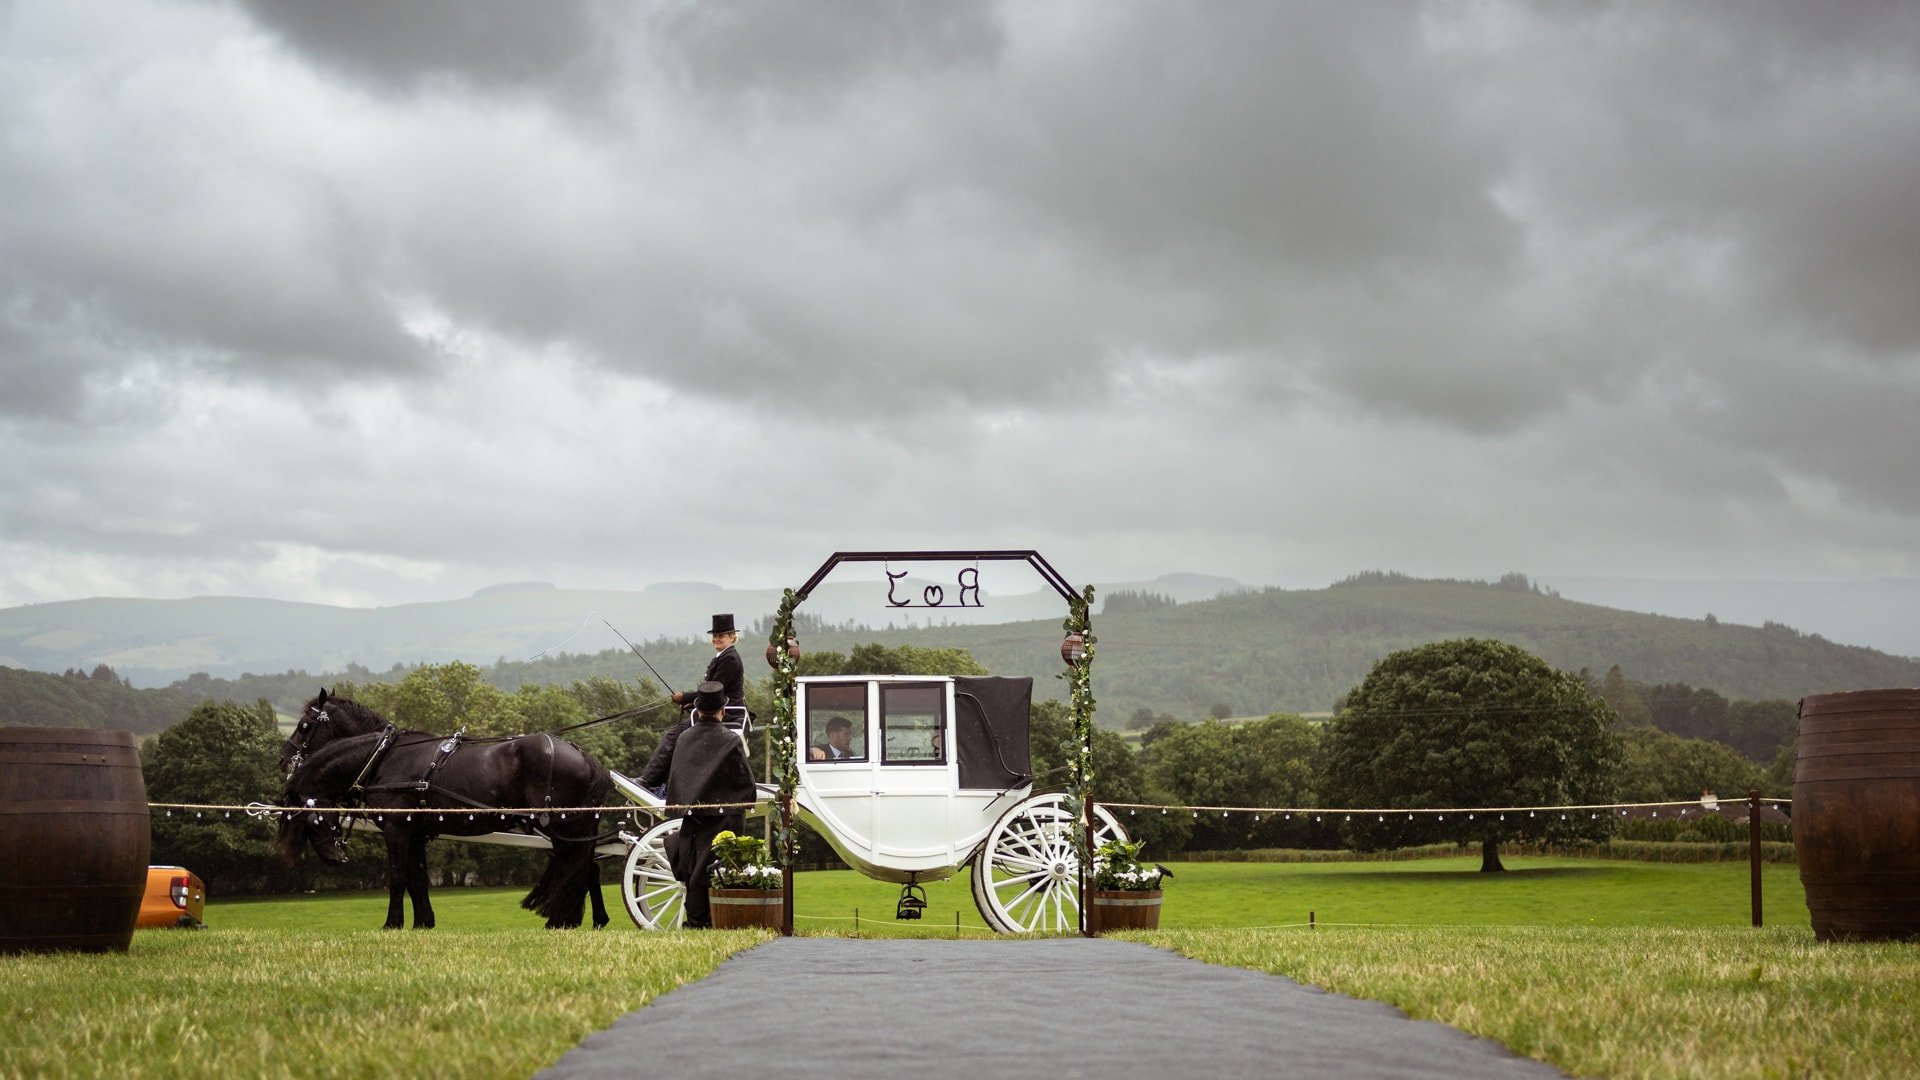 Horse and carriage during stormy wedding